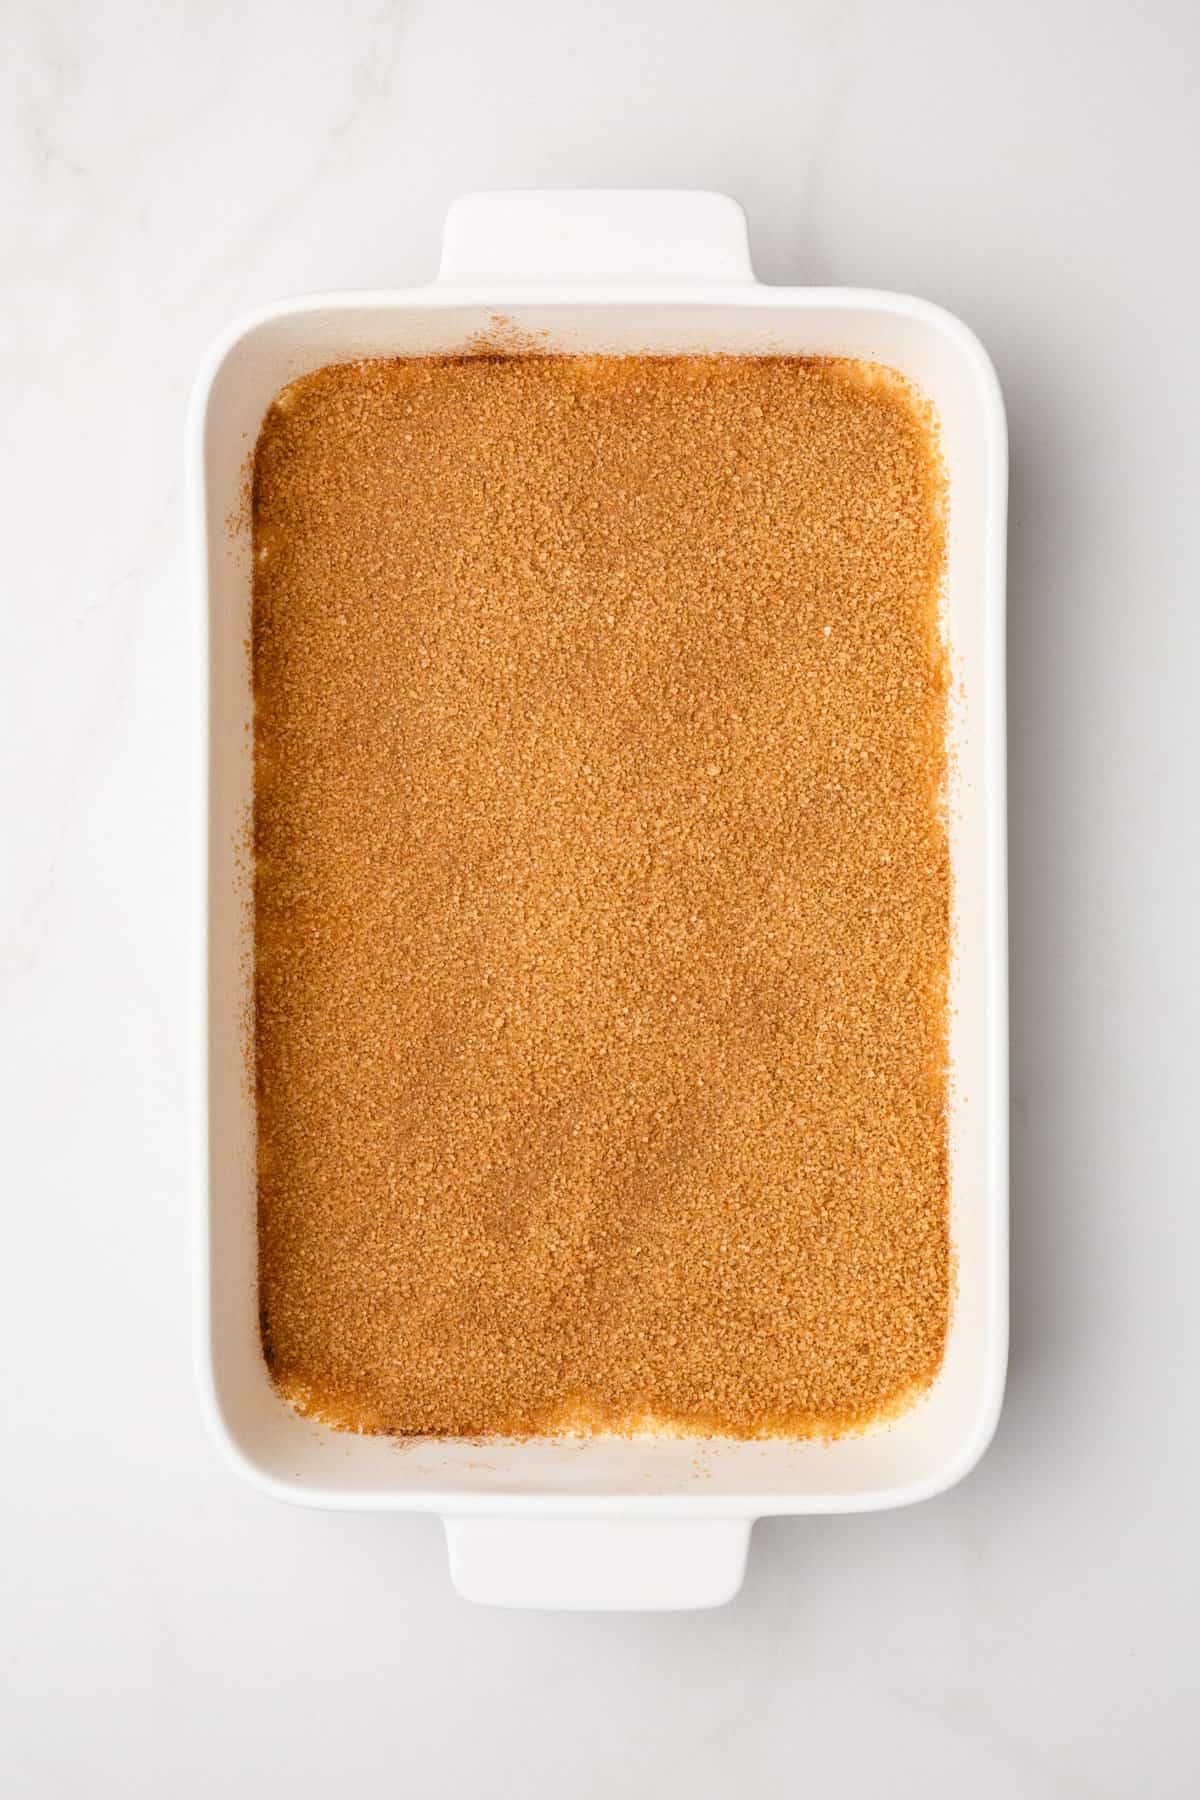 step 2 to make honey bun cake, sprinkle cinnamon sugar mix over the first layer of the cake